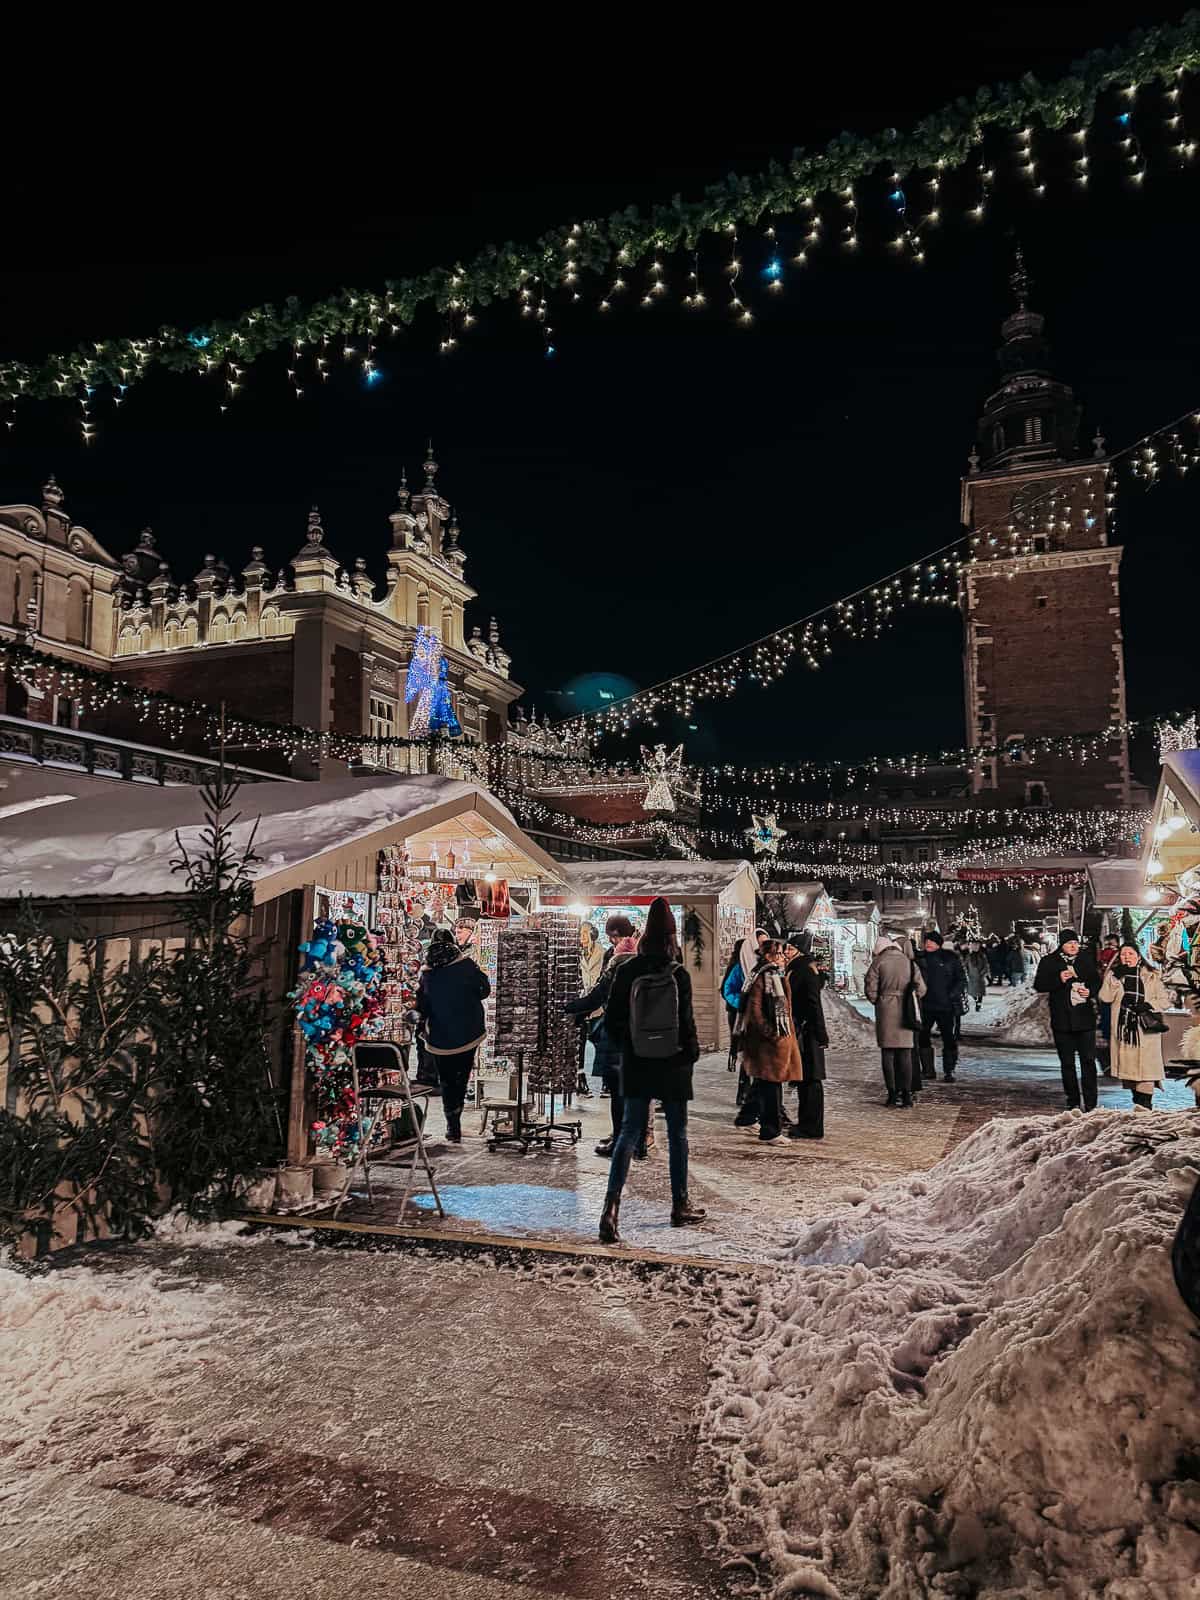 Night scene at a Christmas market with a view of the historic cloth hall illuminated by festive lights, snowy paths, and shoppers browsing through various stalls